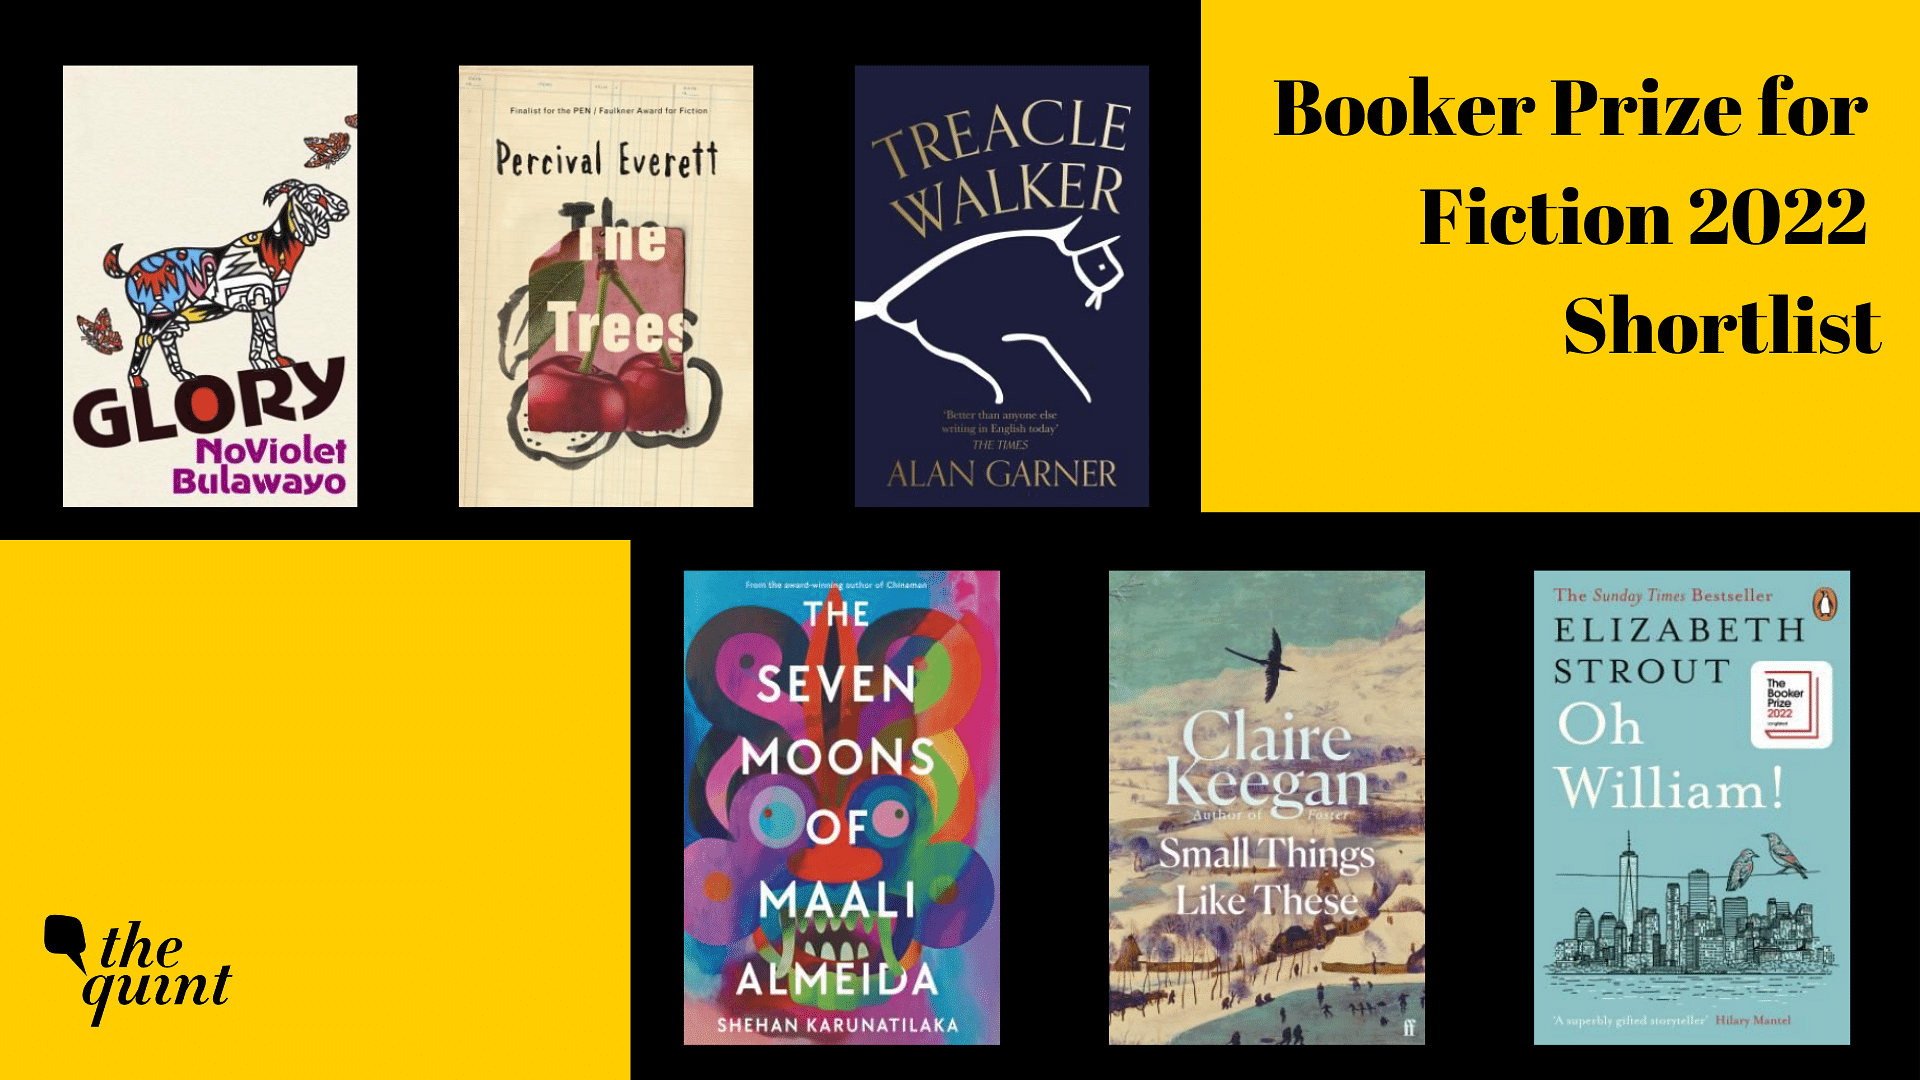 Booker Prize for Fiction 2022 Shortlist Announced With 5 Nationalities